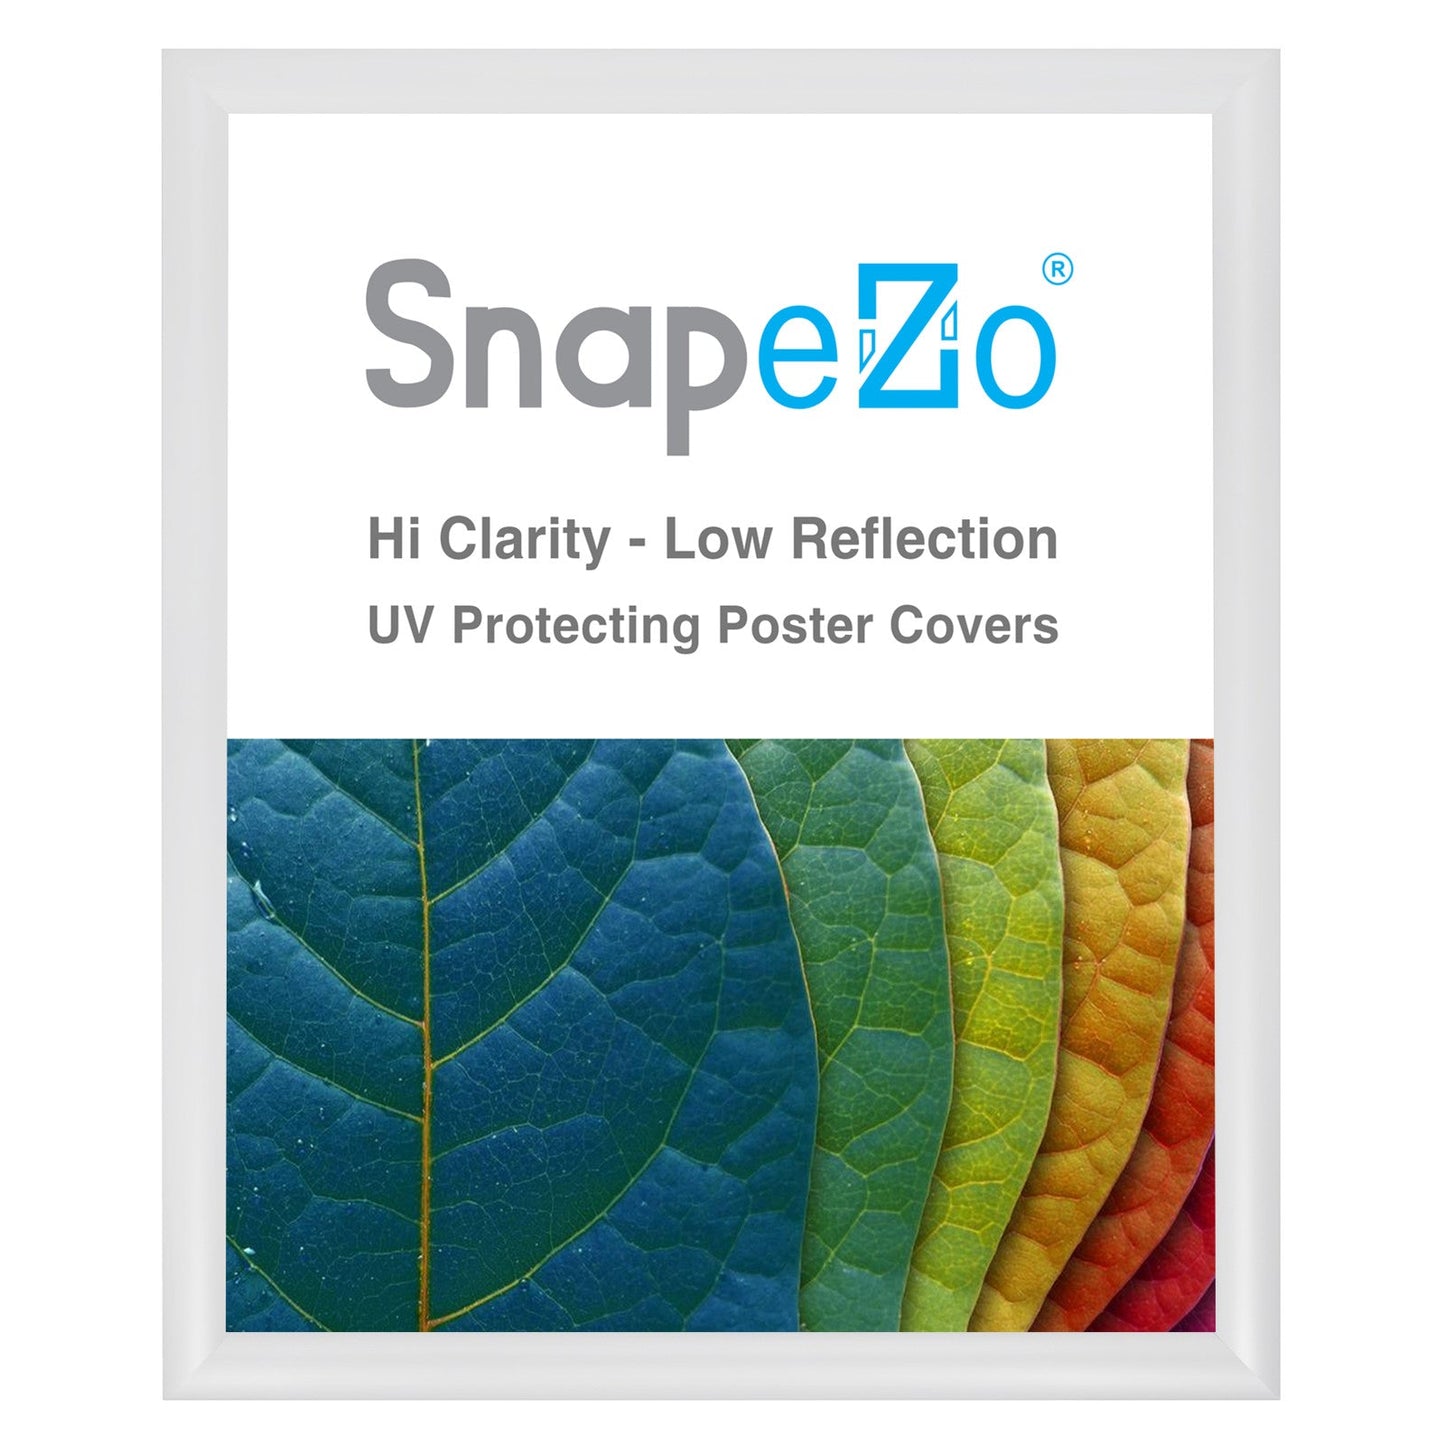 Load image into Gallery viewer, 20x24 White SnapeZo® Snap Frame - 1.2&amp;quot; Profile
